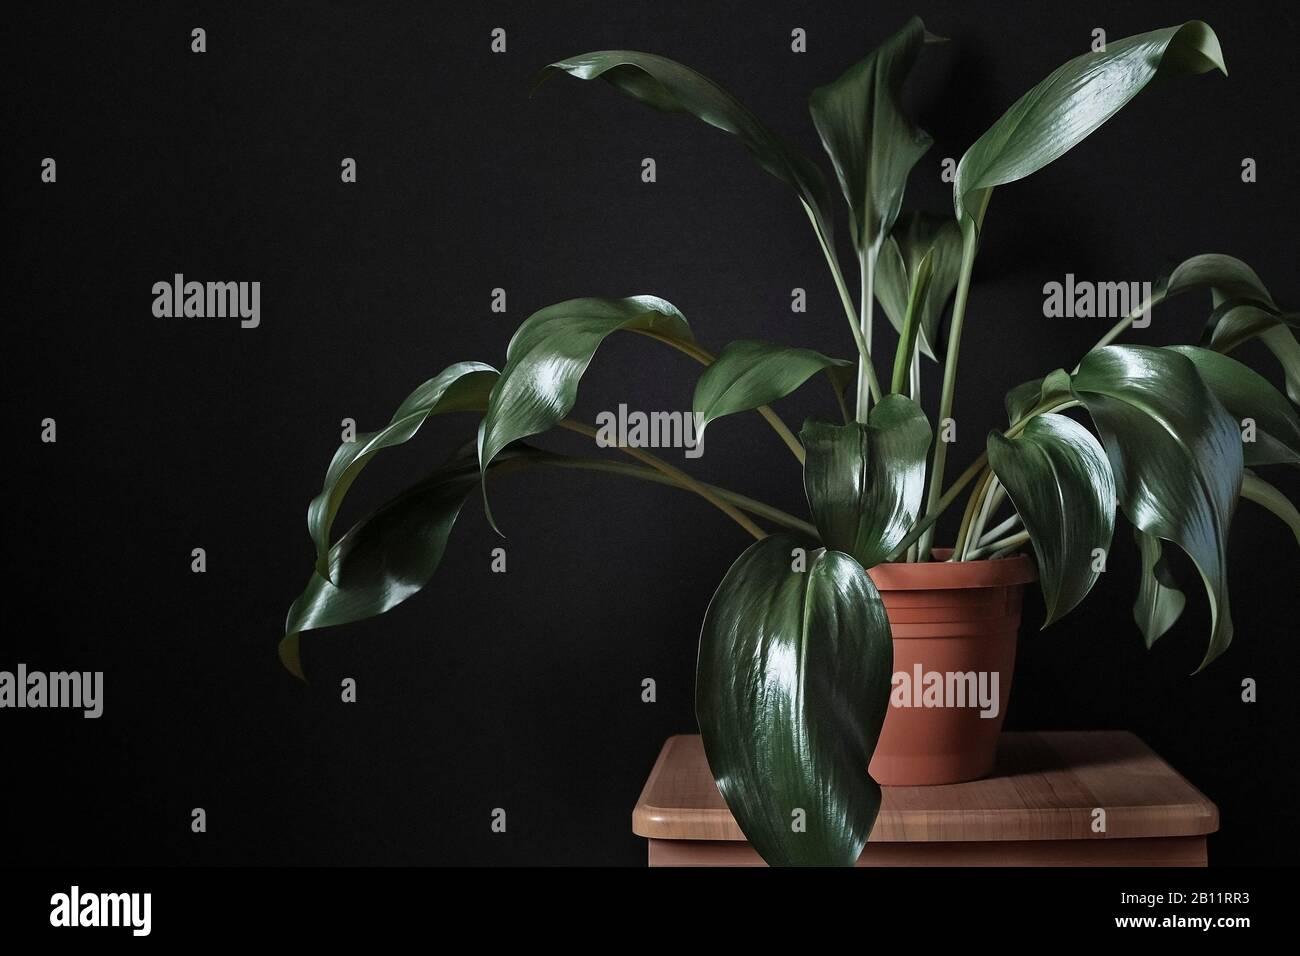 Leafy green eucharis potted plant on a stool Stock Photo